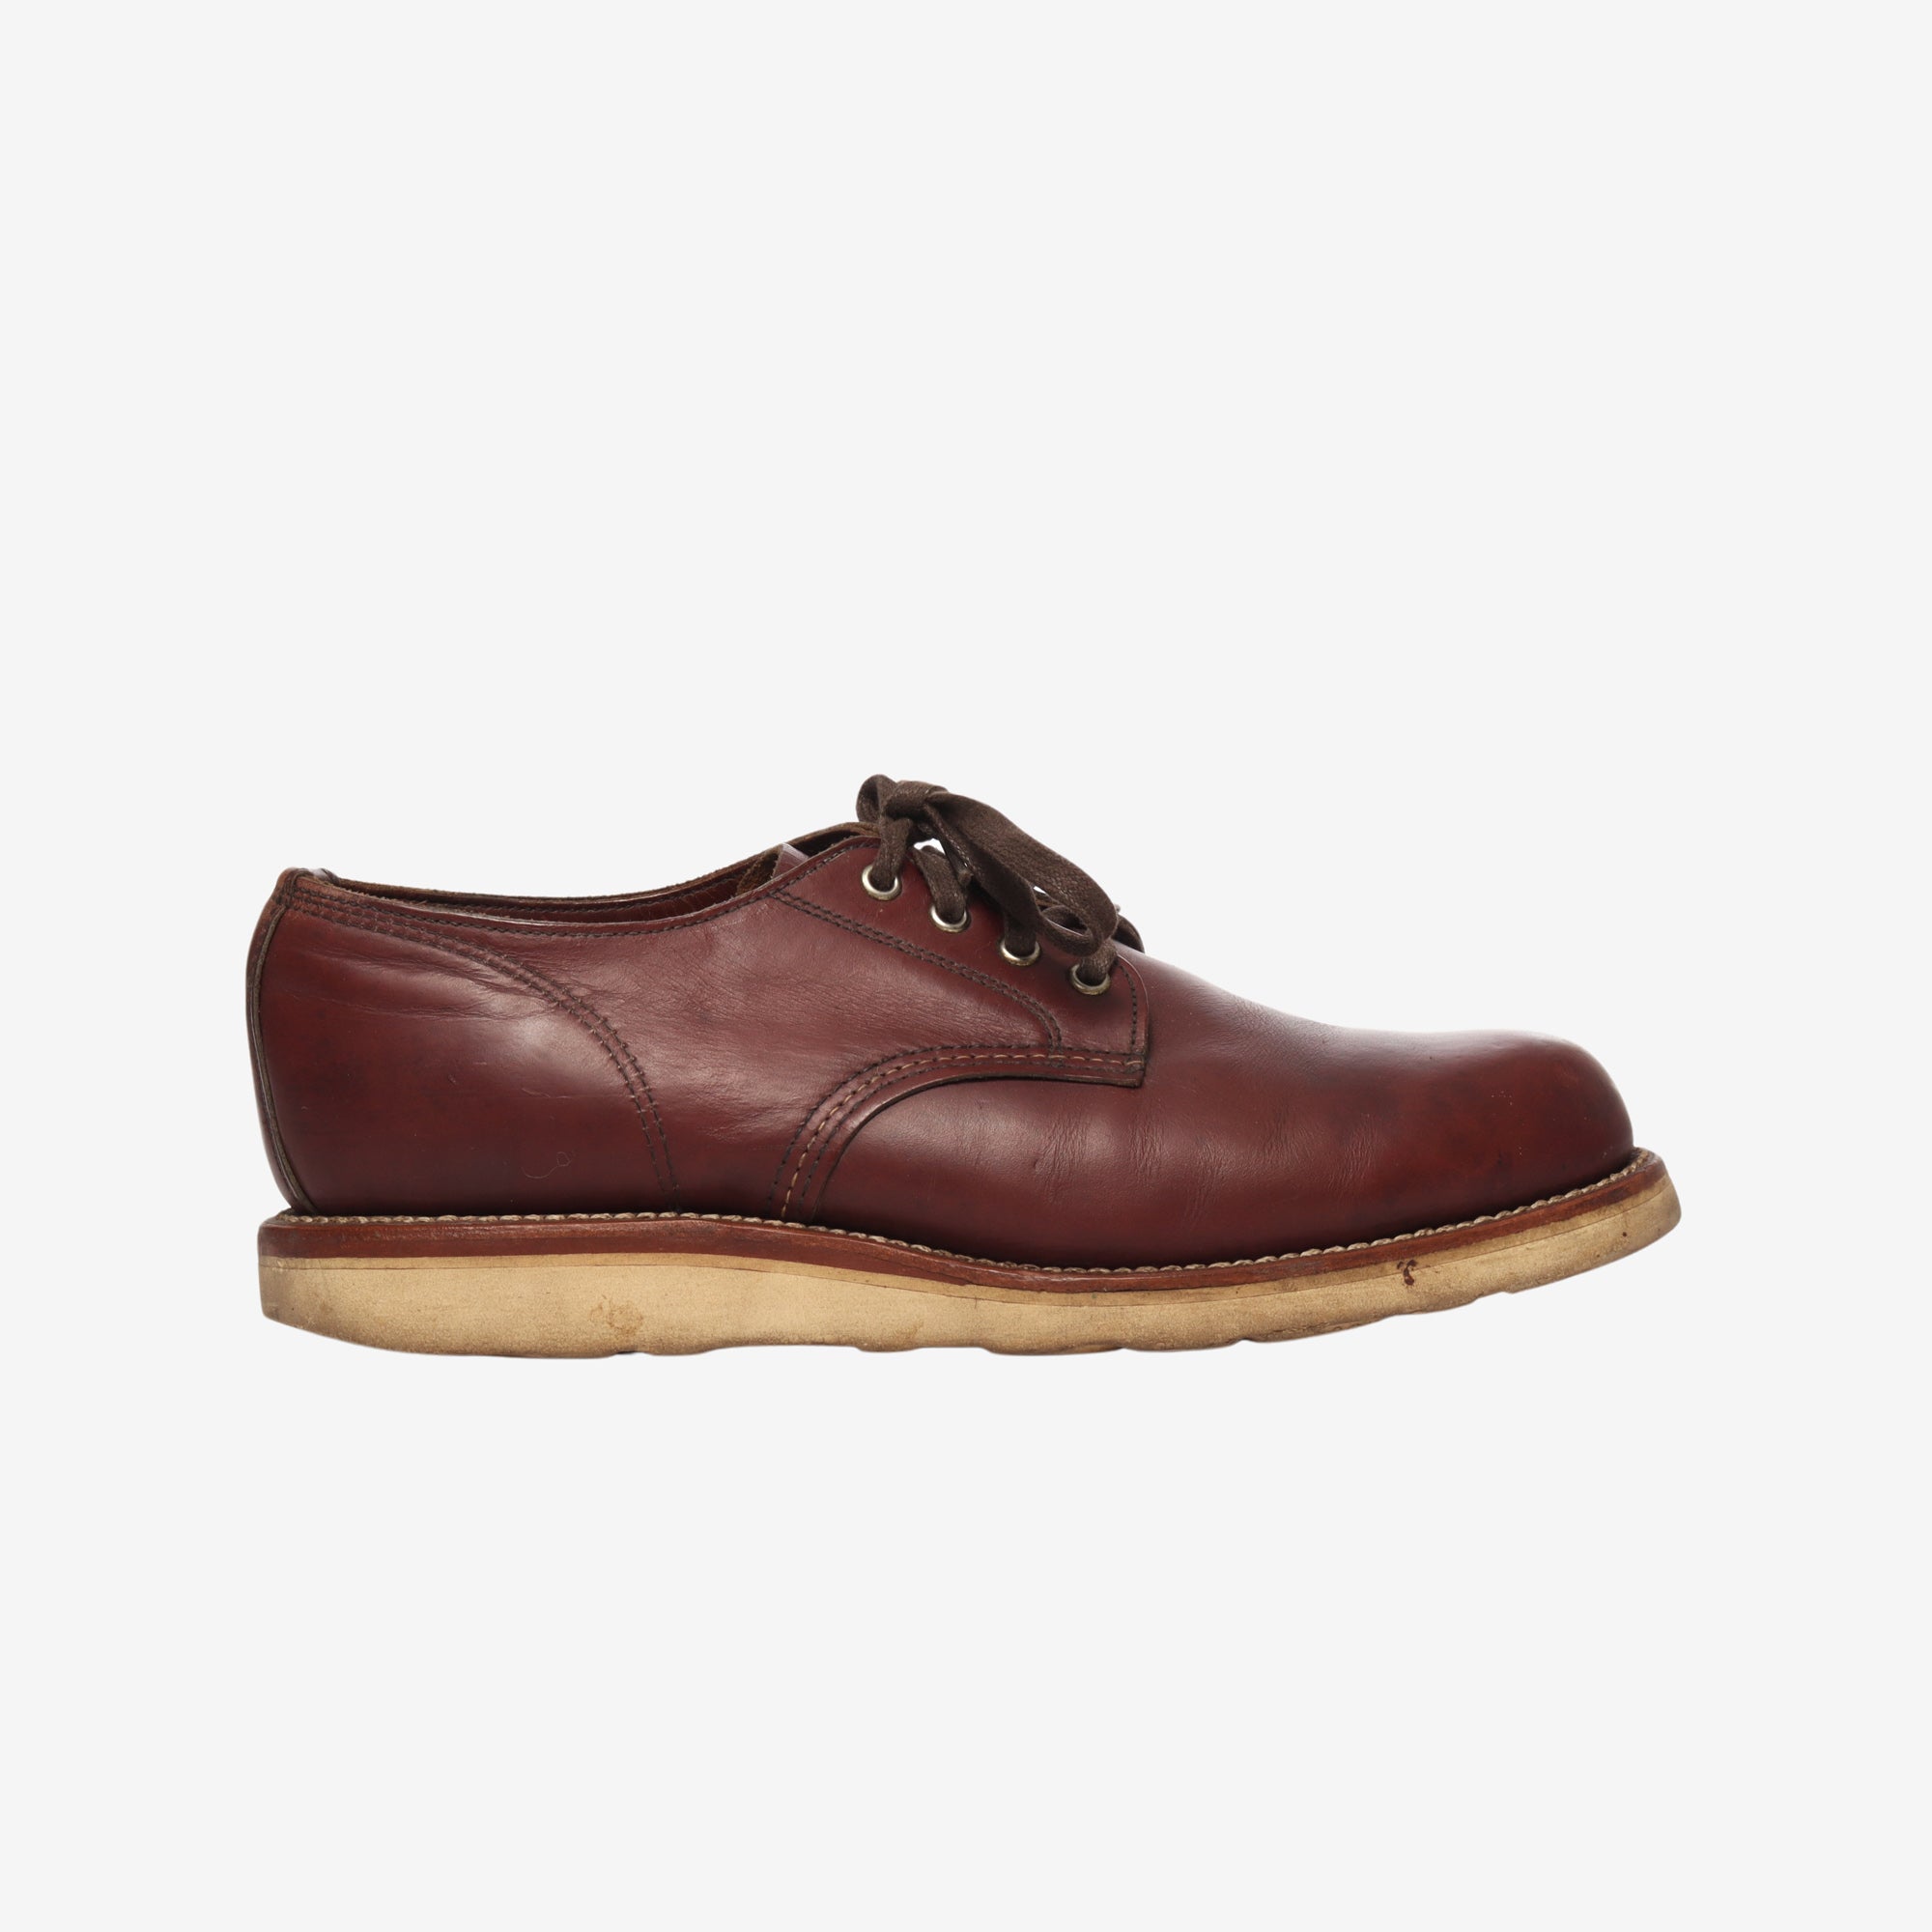 Oxford Wedge Sole Shoes